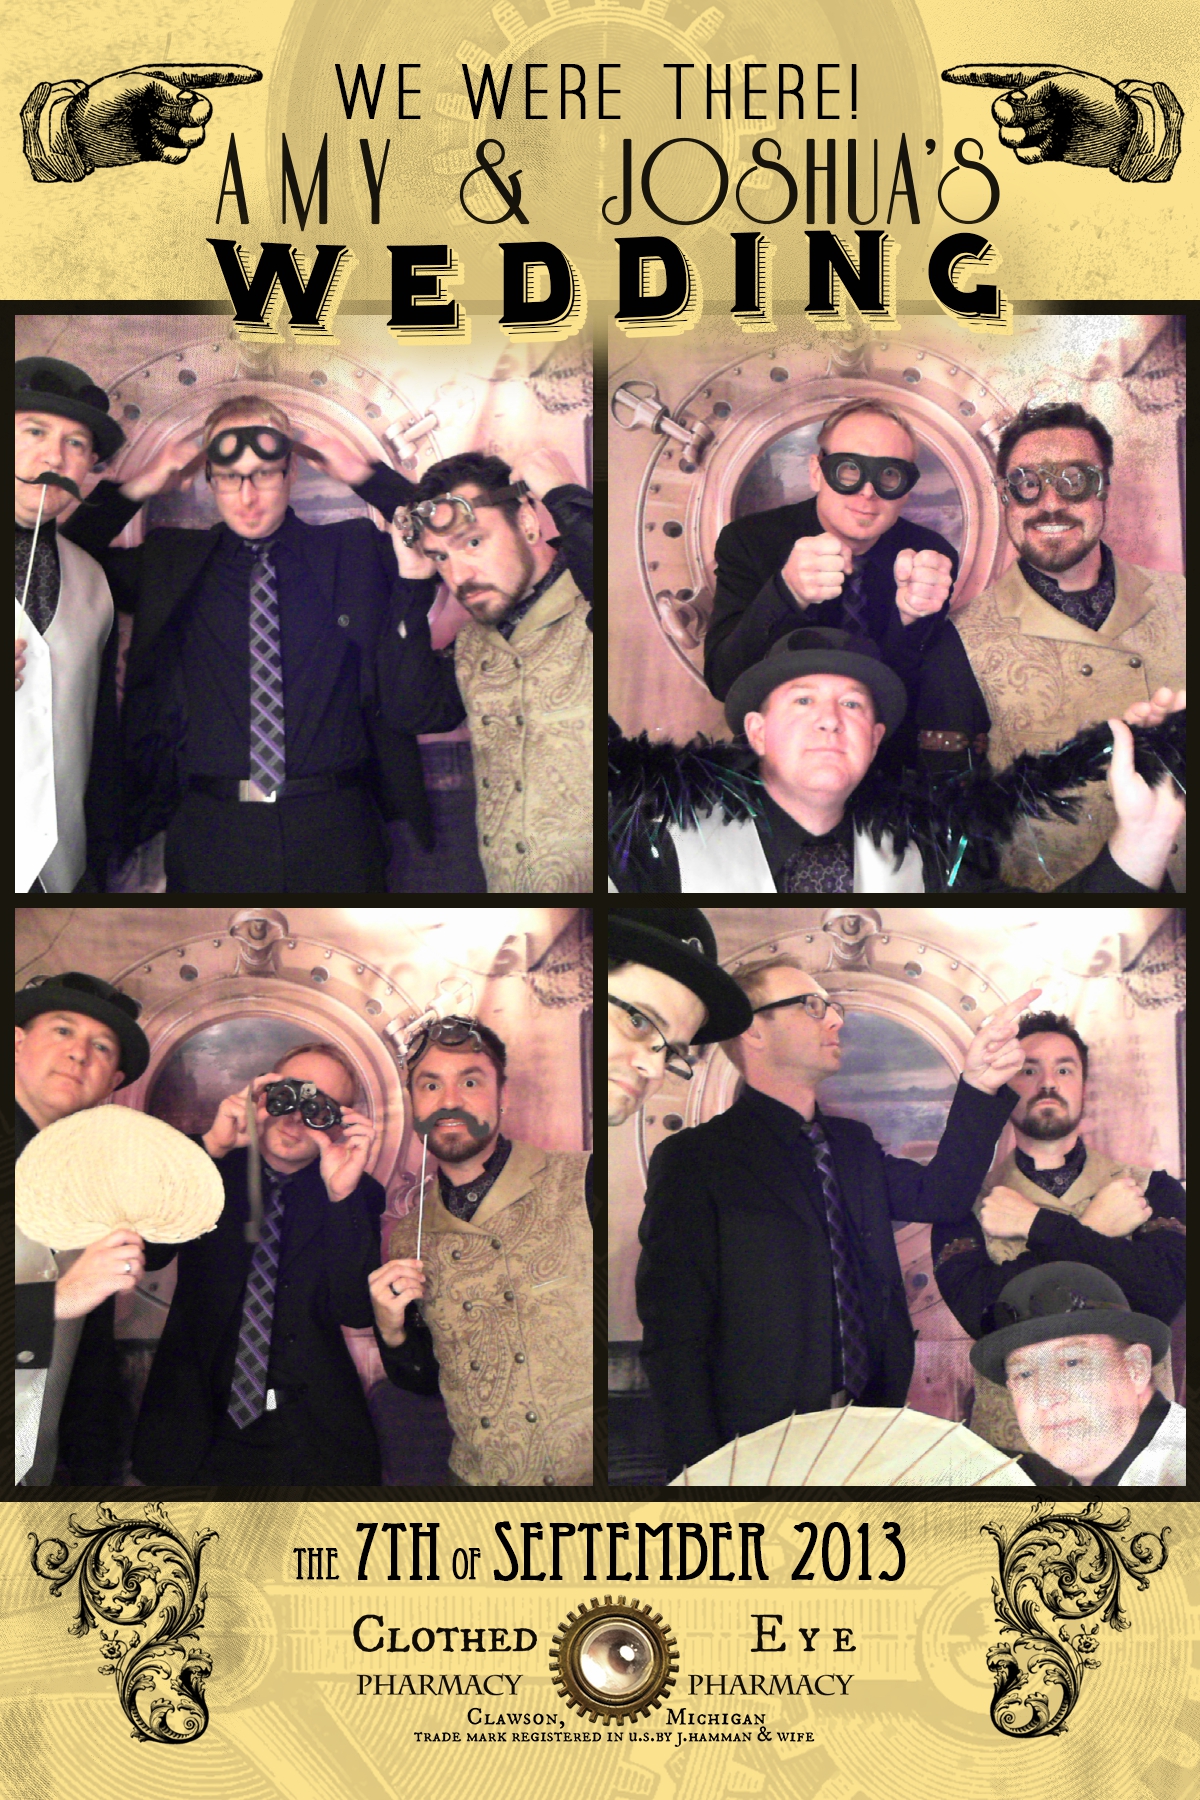 Groomsmen messing around in the photo booth